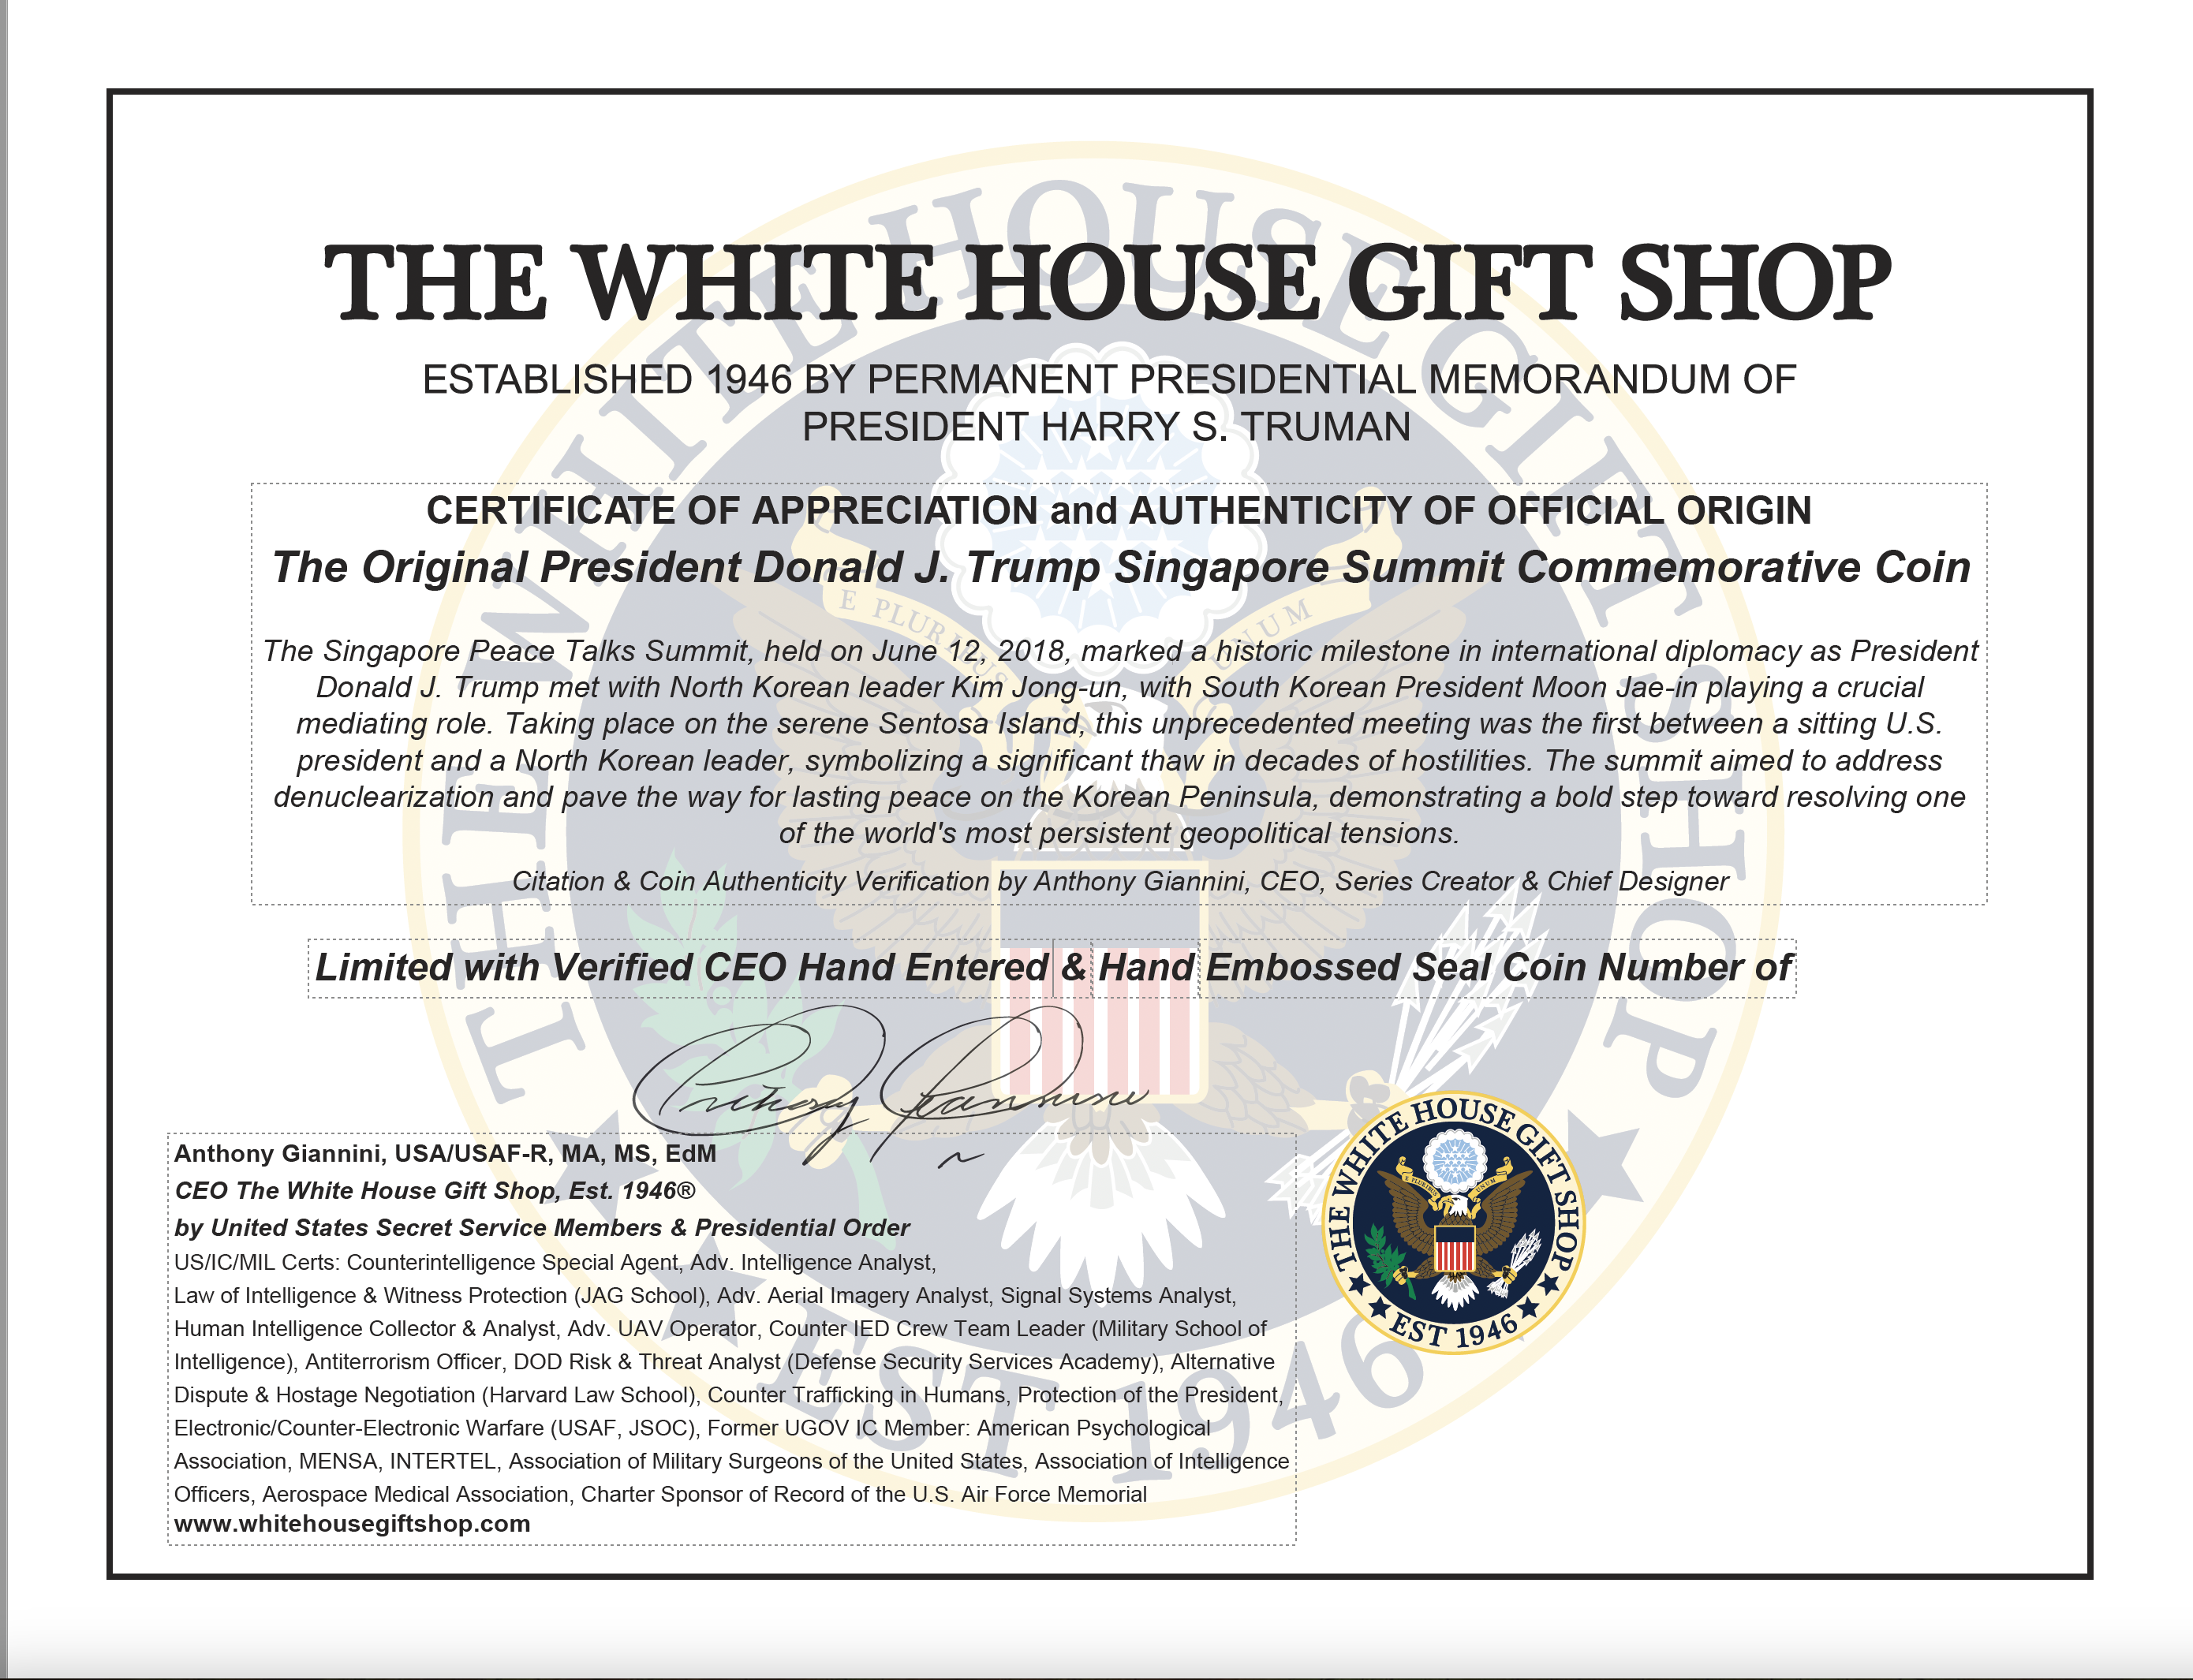 Anthony Giannini, CEO, Signed Certificate of White House Gift Shop Authenticity